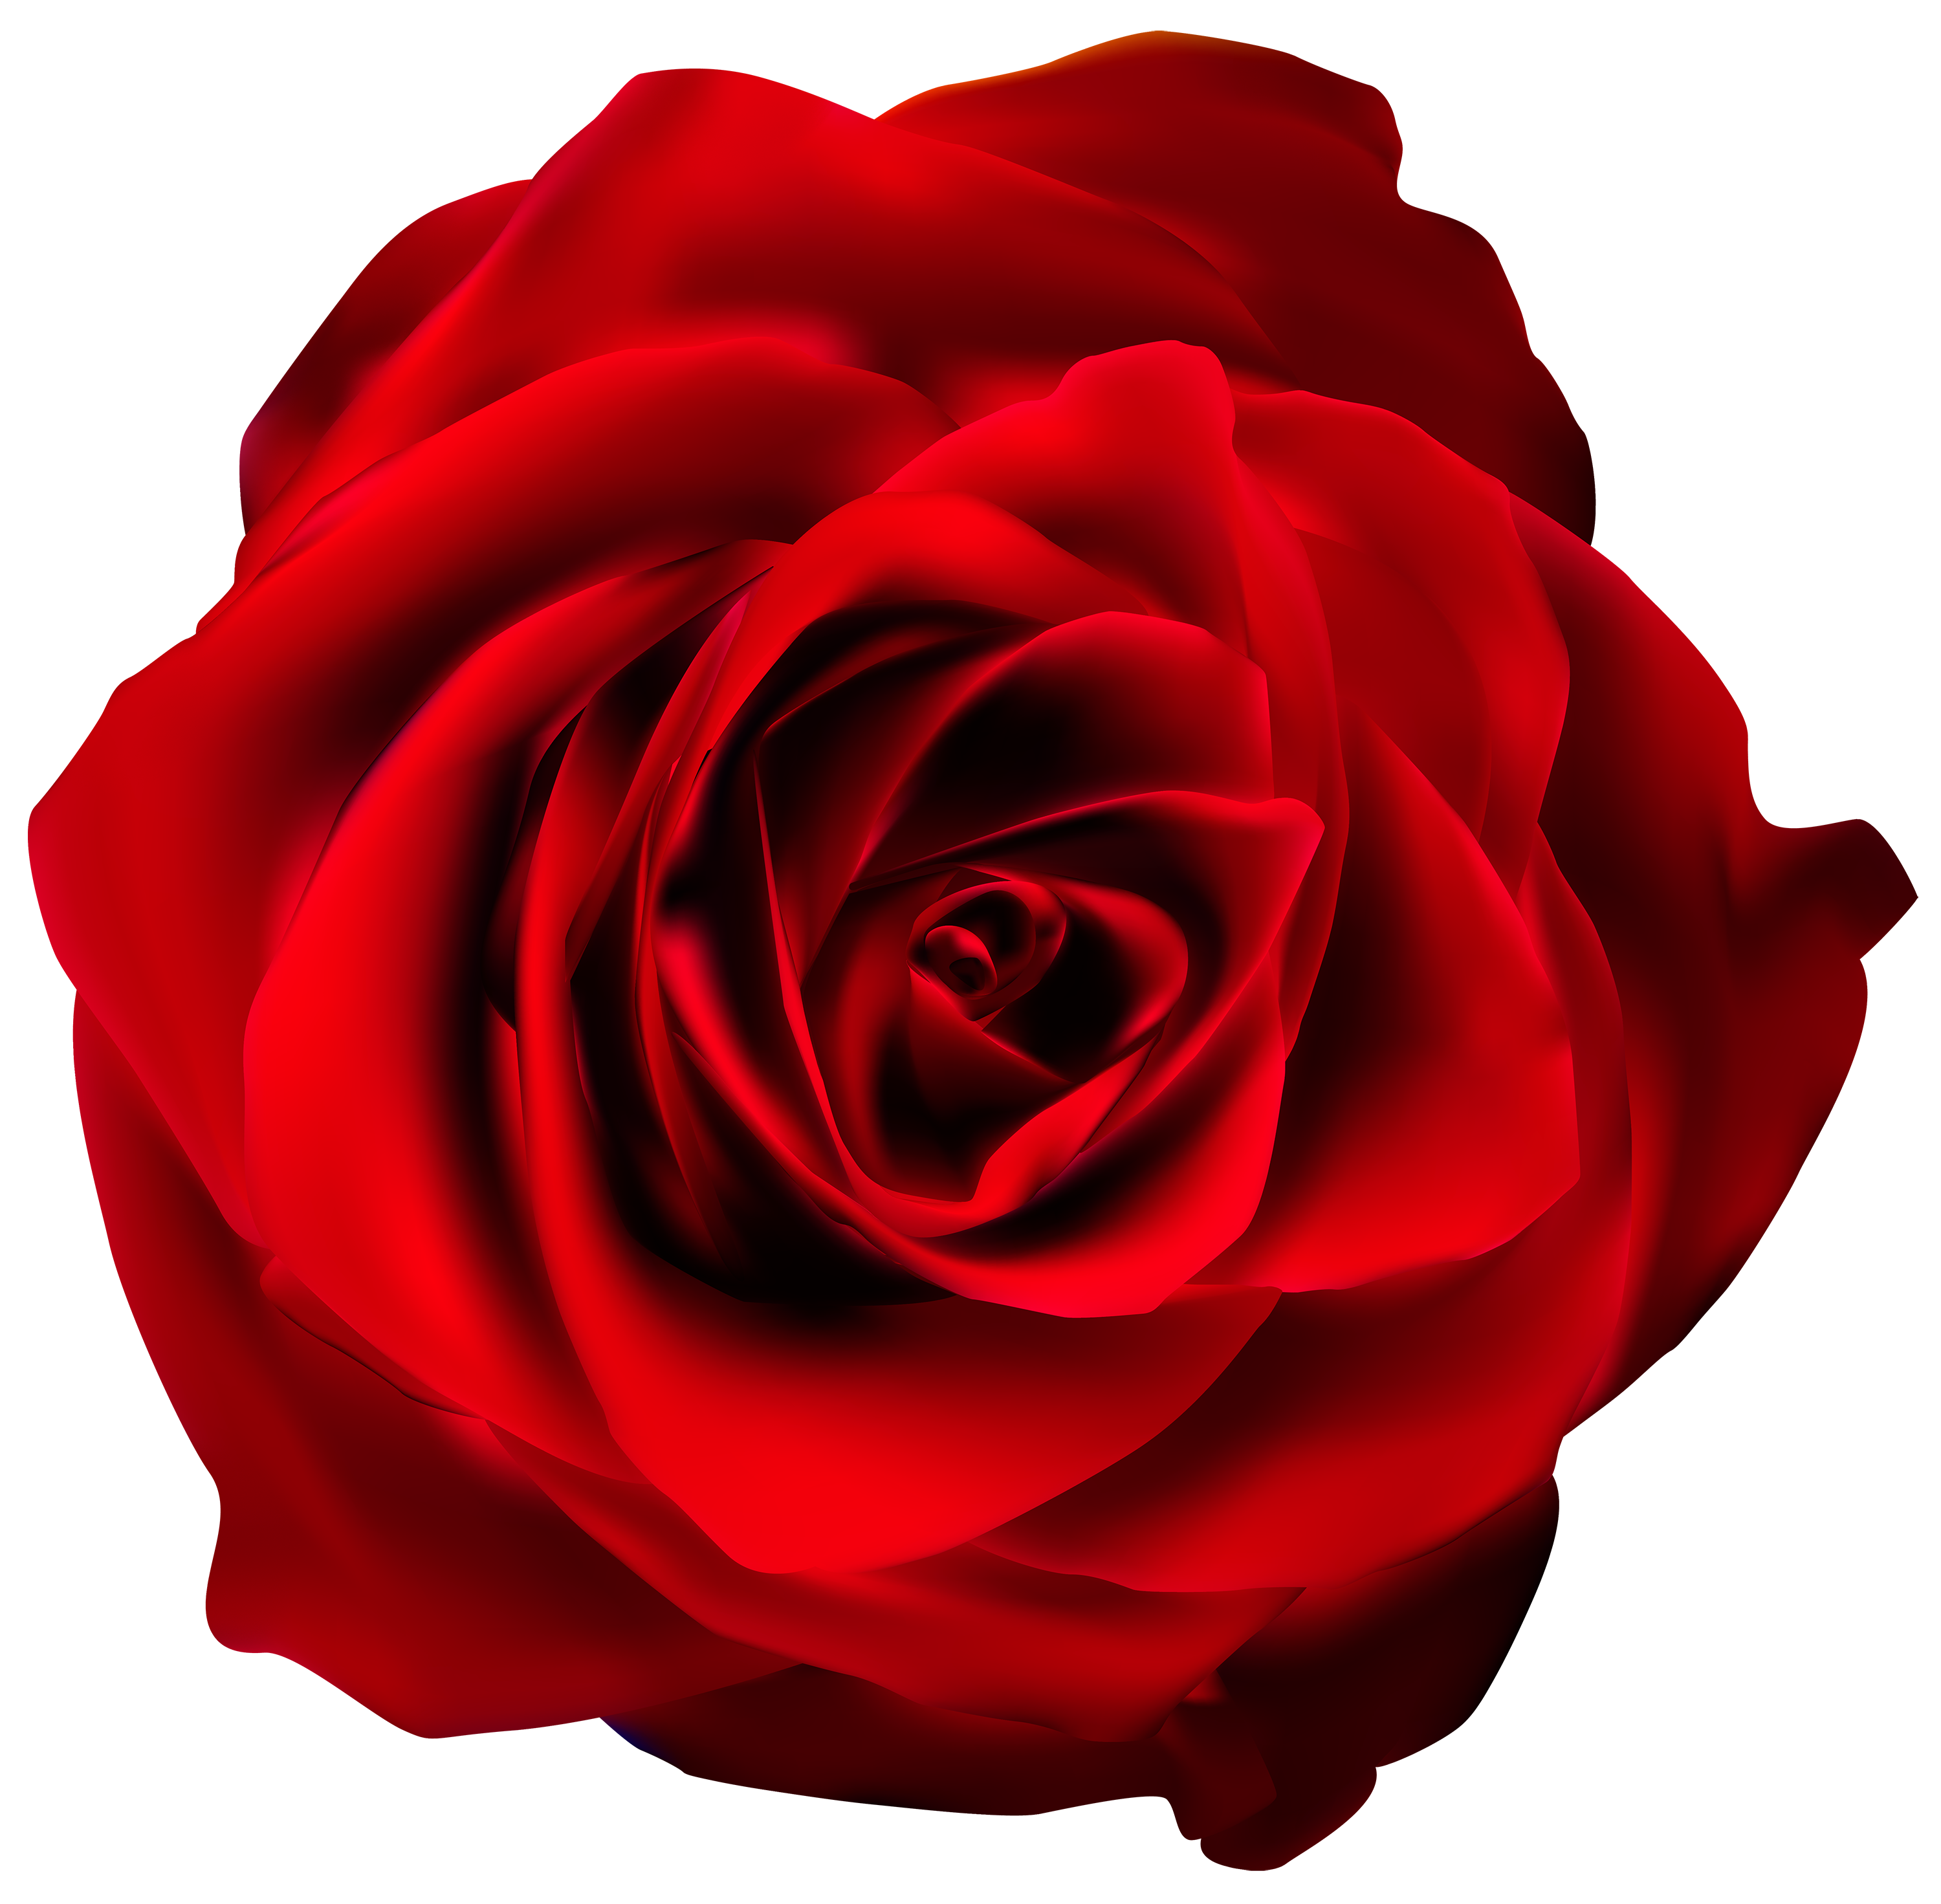 Free Red Rose Transparent Background Download Free Red Rose